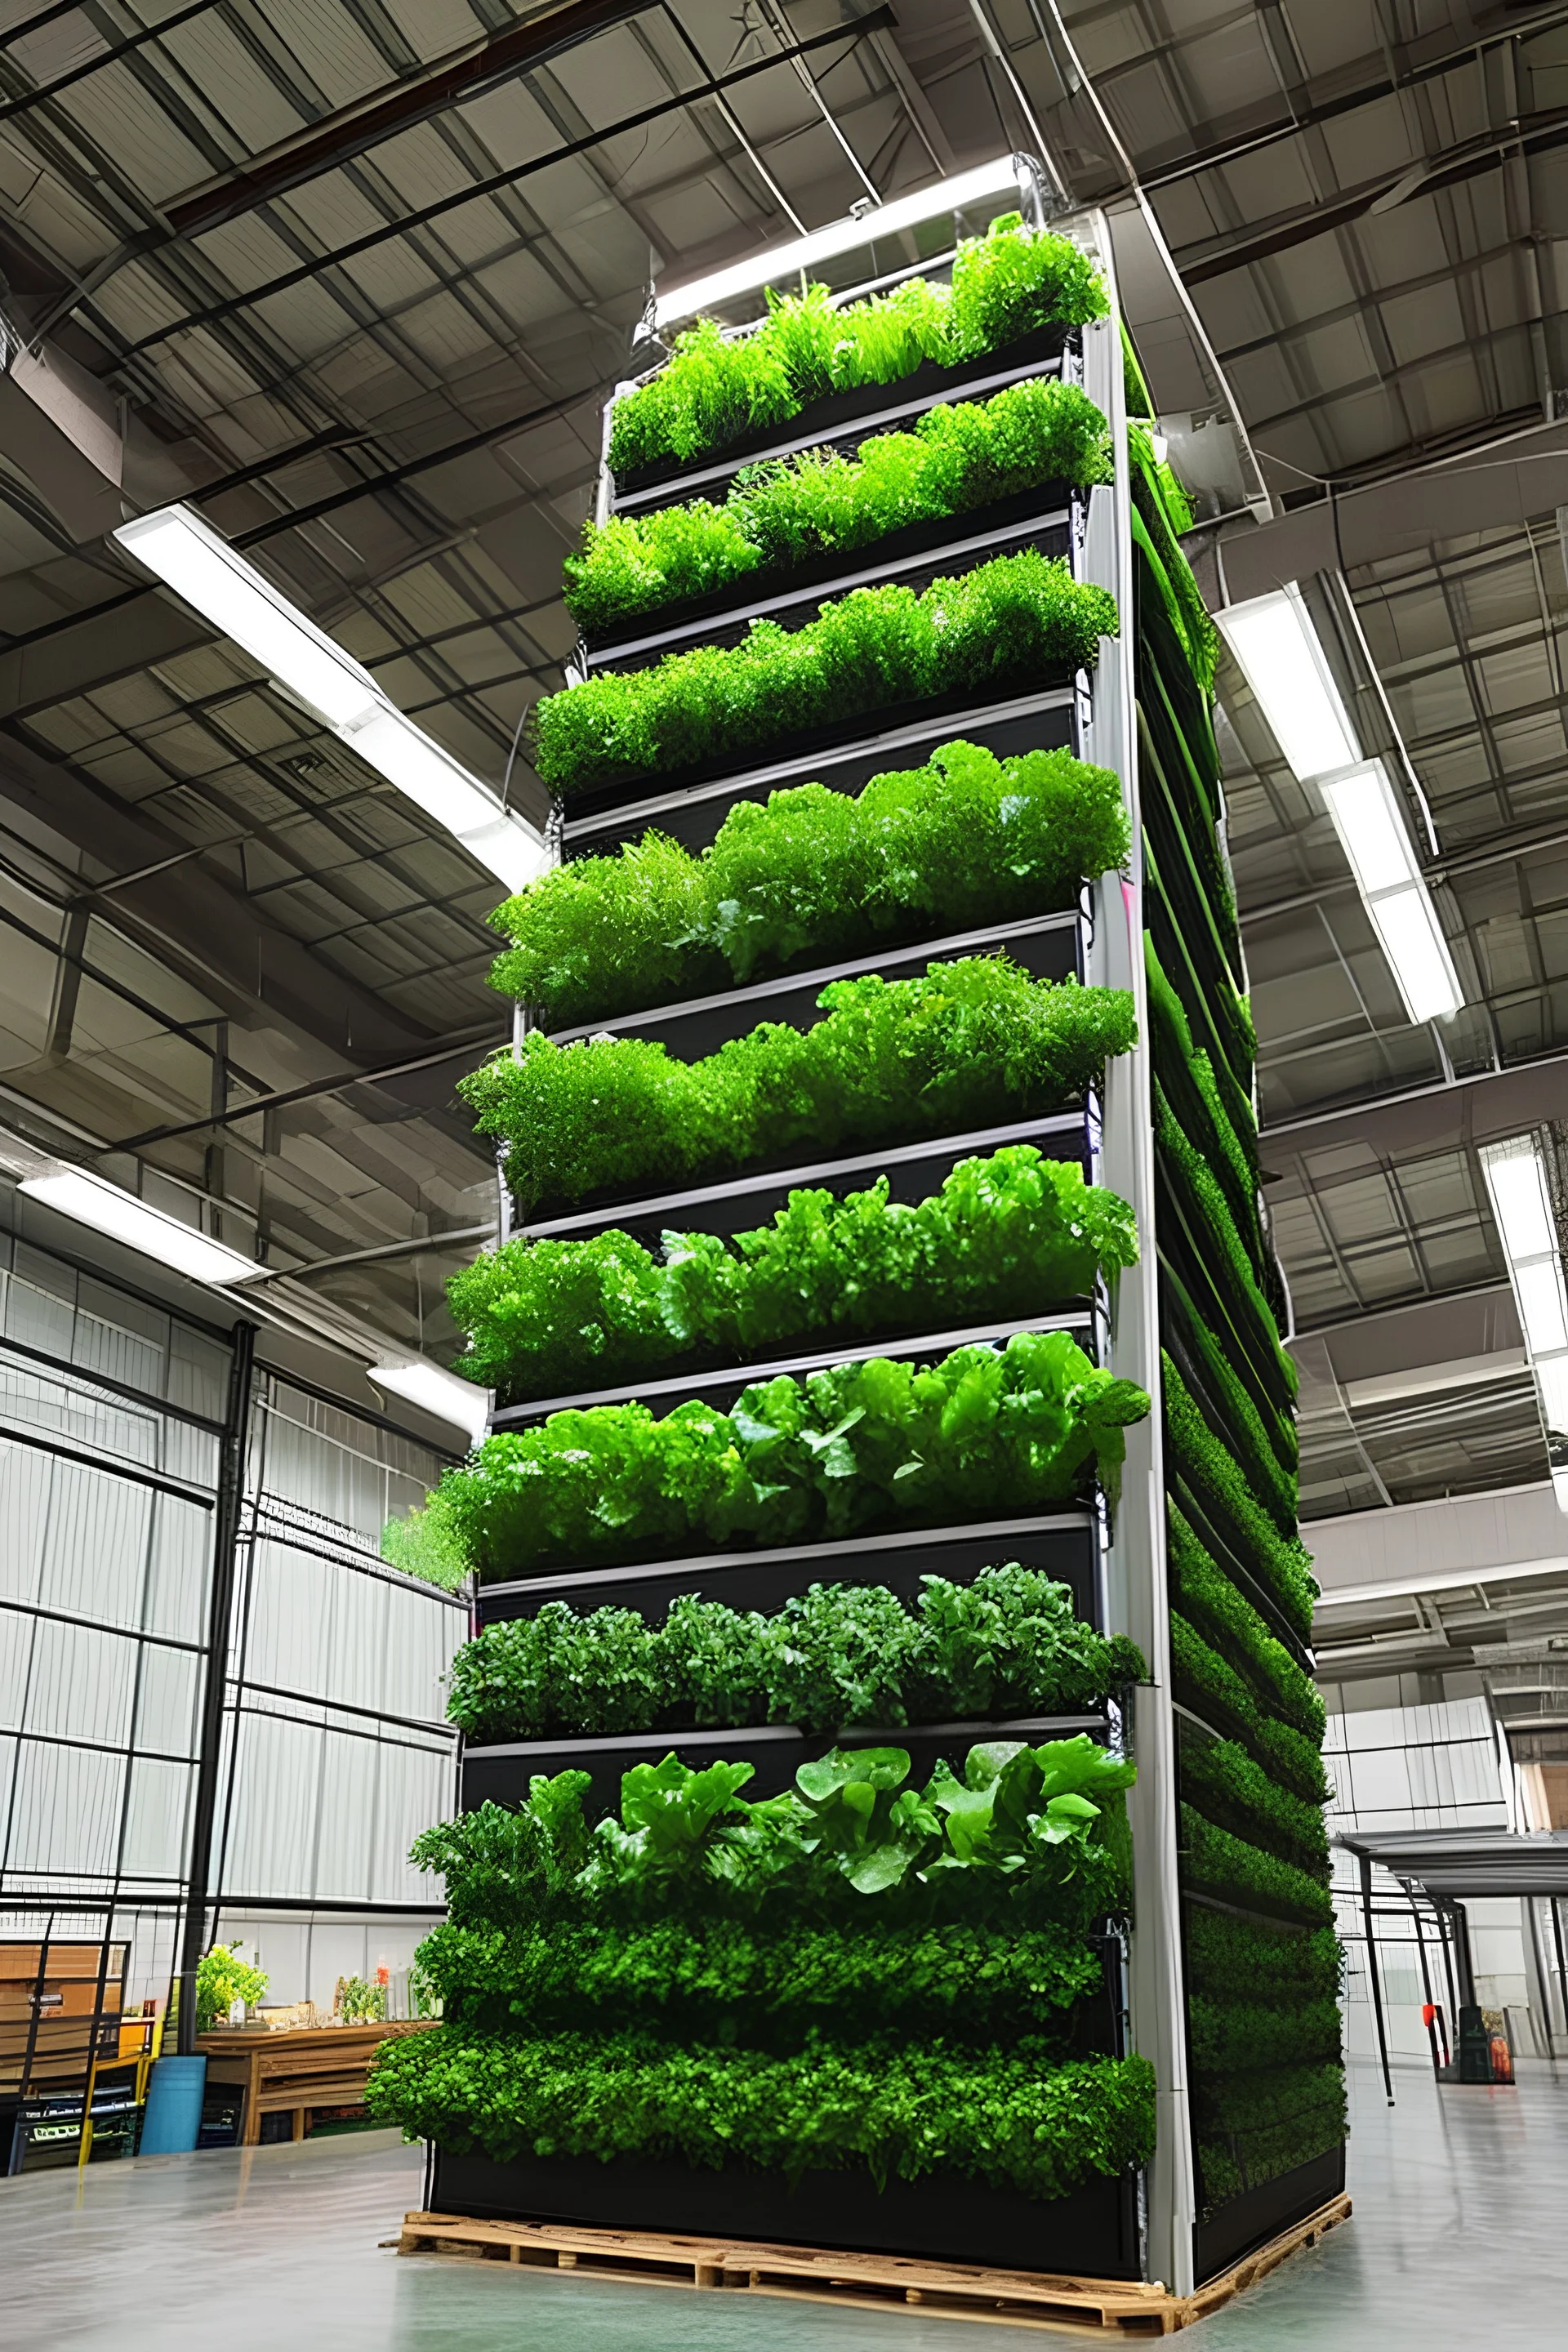 a vertical farm inside a warehouse. Show 12 vertical units The setting should be futuristic and sustainable.